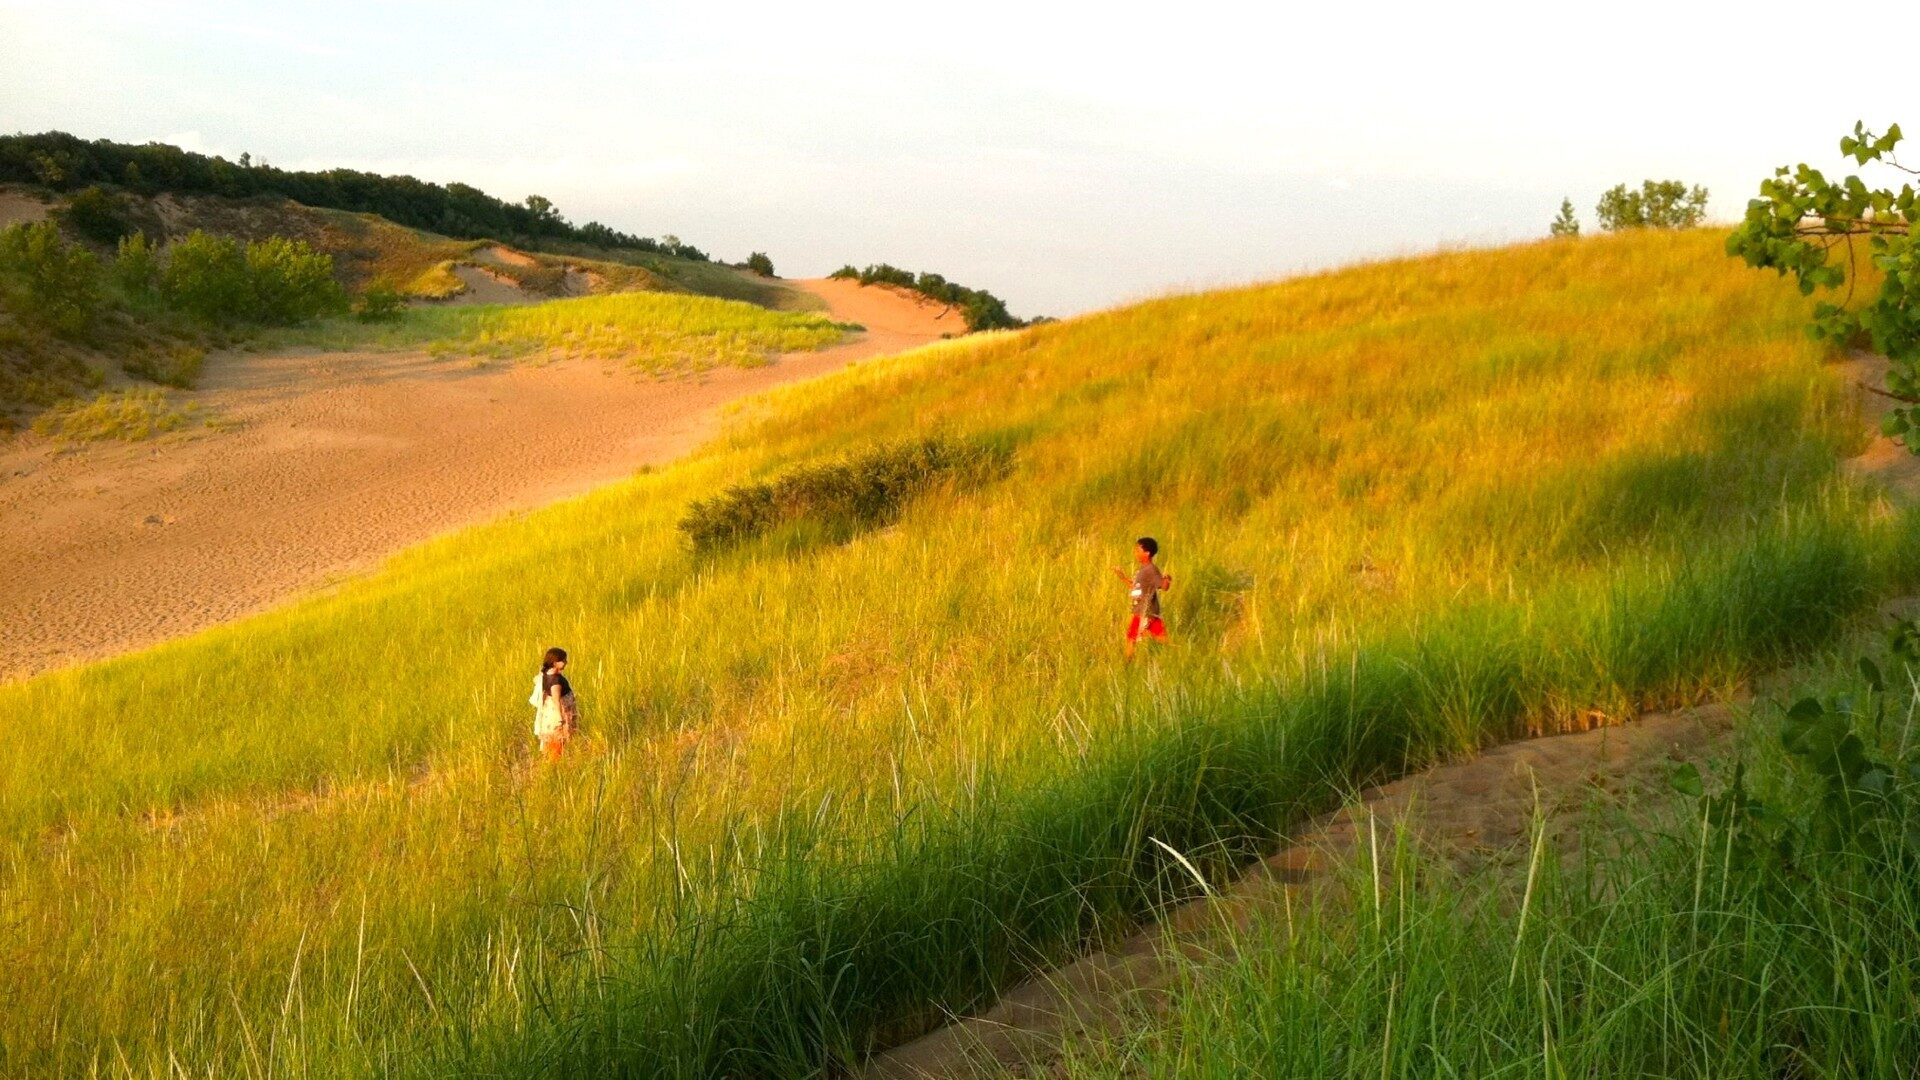 People walking in an expansive grassy dune area near a beach